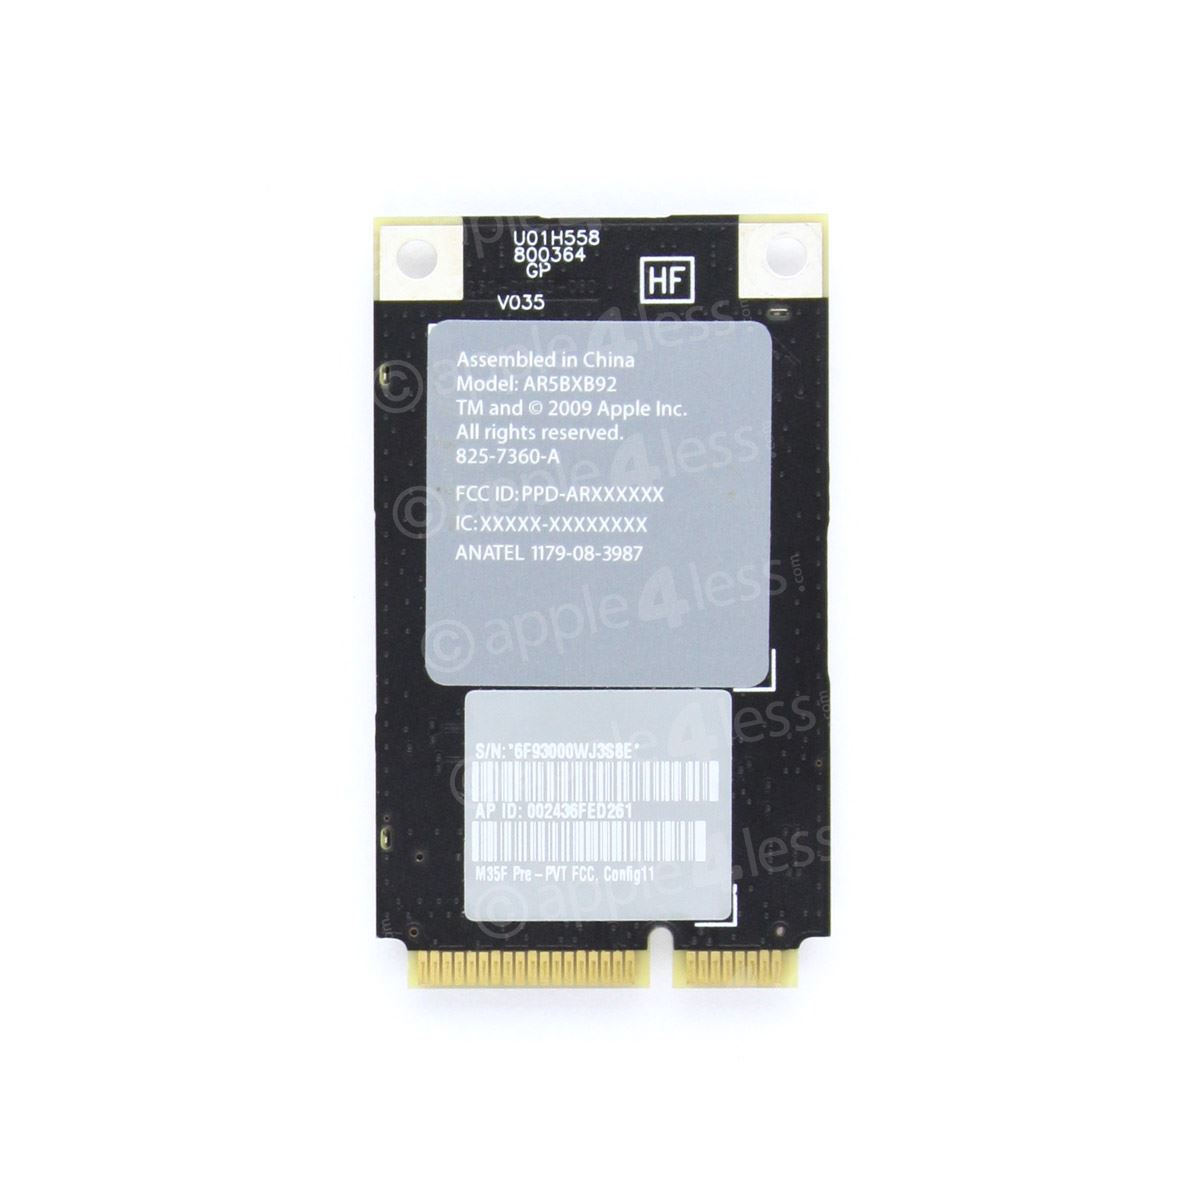 661-5423 Airport Extreme Card for iMac 27 inch Late 2009-Mid 2010 A1311 MB950LL/A, MC508LL/A (825-7360, 607-3758)